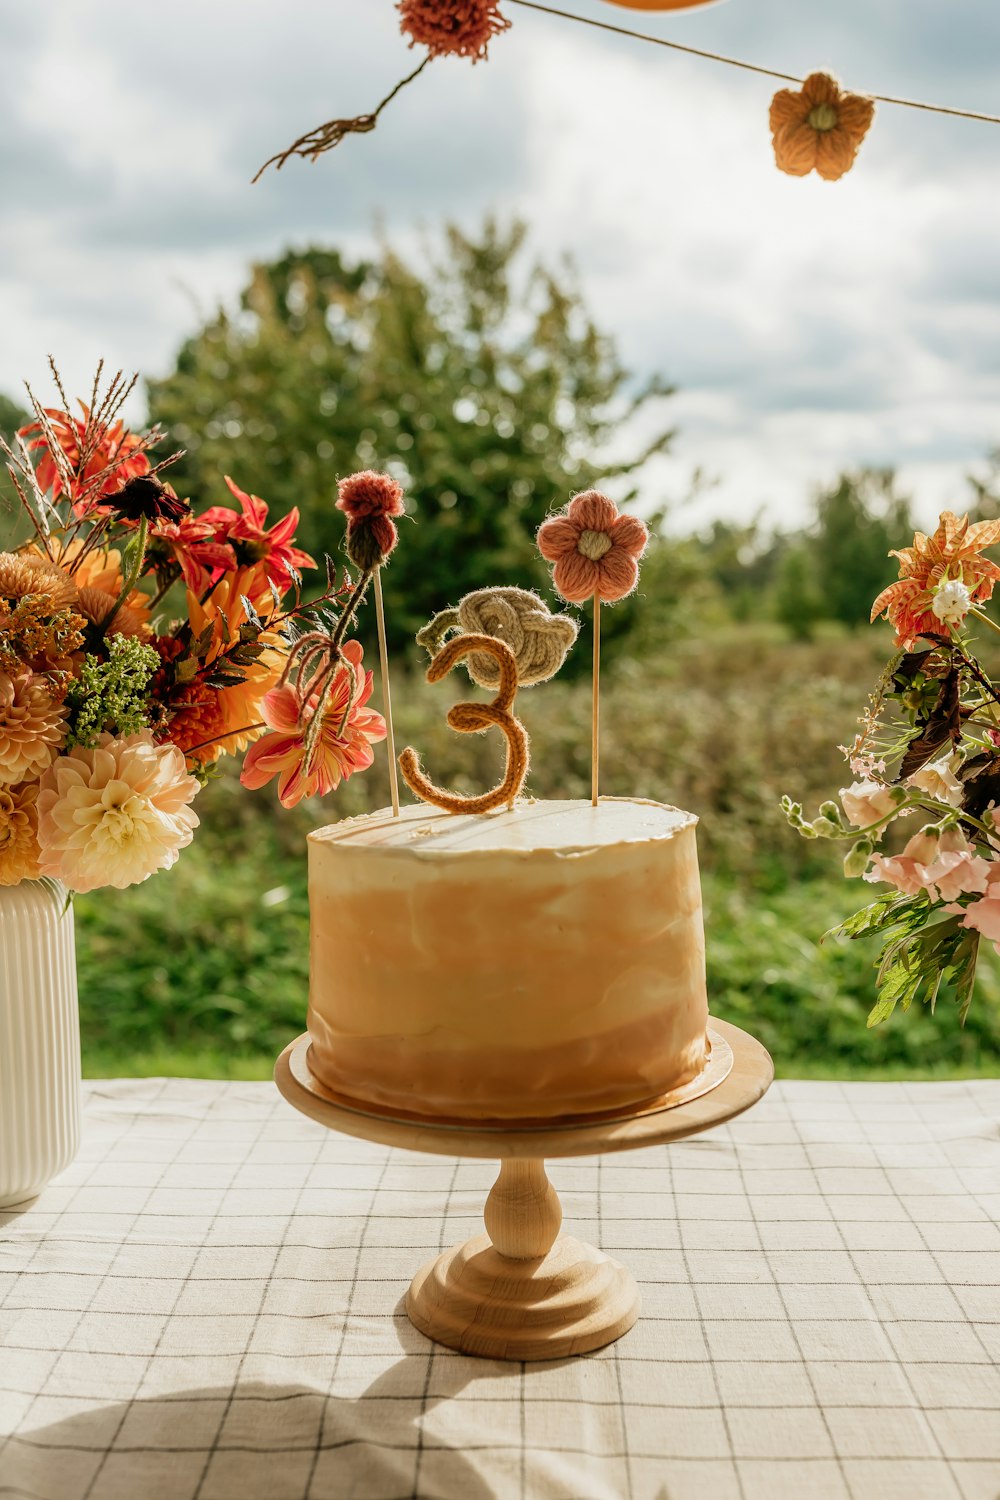 a cake sitting on top of a table next to a vase filled with flowers